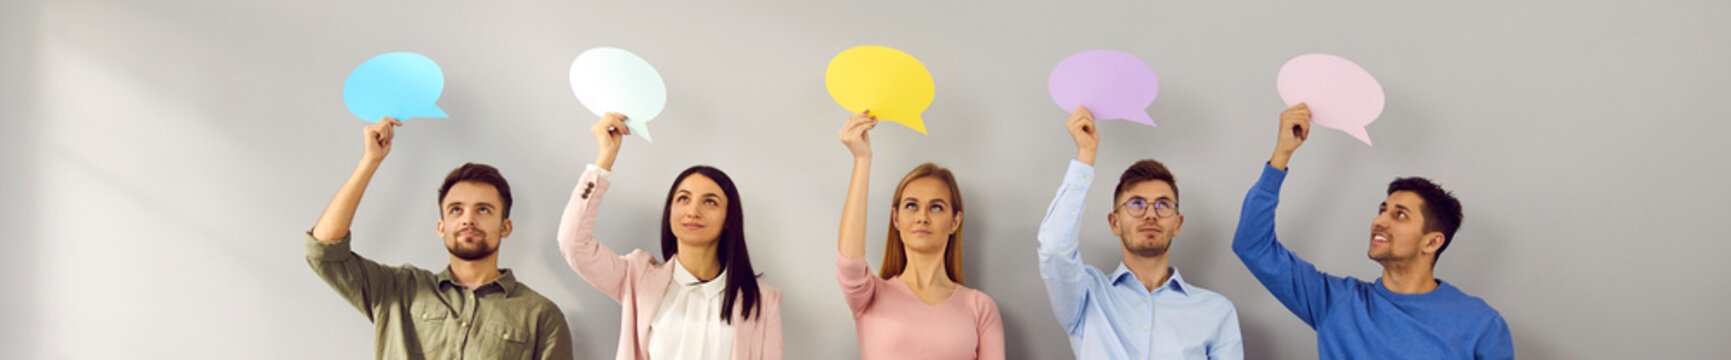 Group of happy young people standing in row and holding empty oval colorful mock up message bubbles. Team of male and female students or employees showing mockup speech balloons for sharing opinions